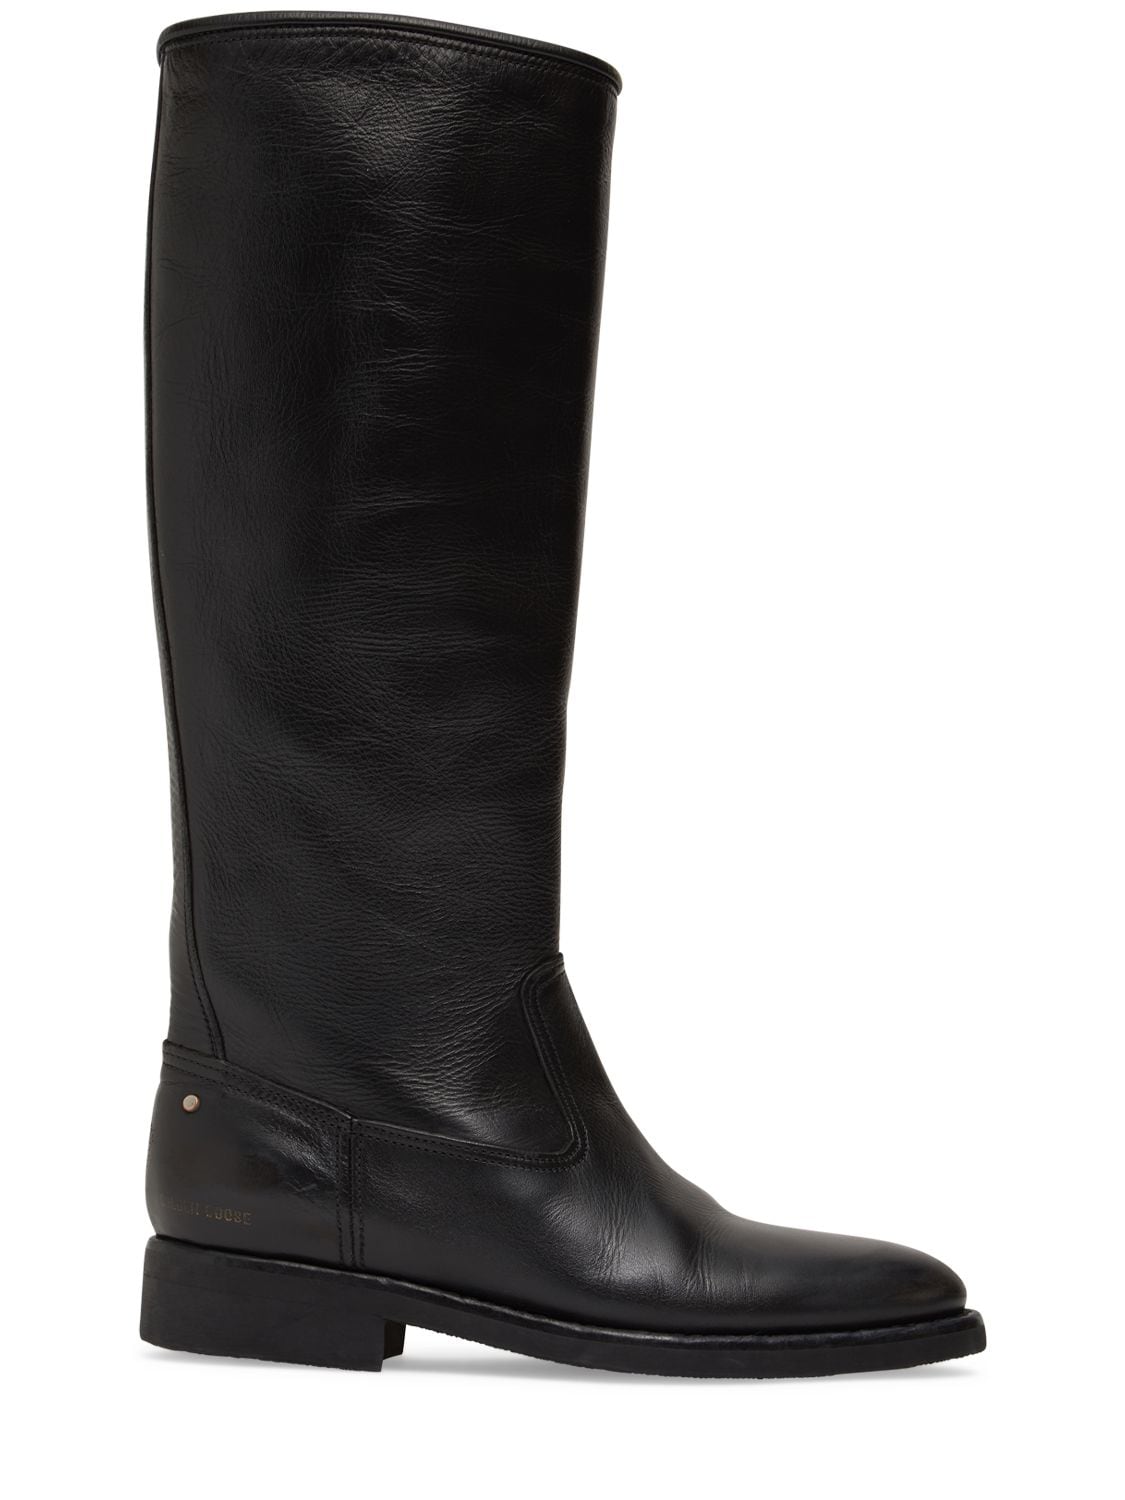 Image of 25mm Hi Biker Leather Tall Boots